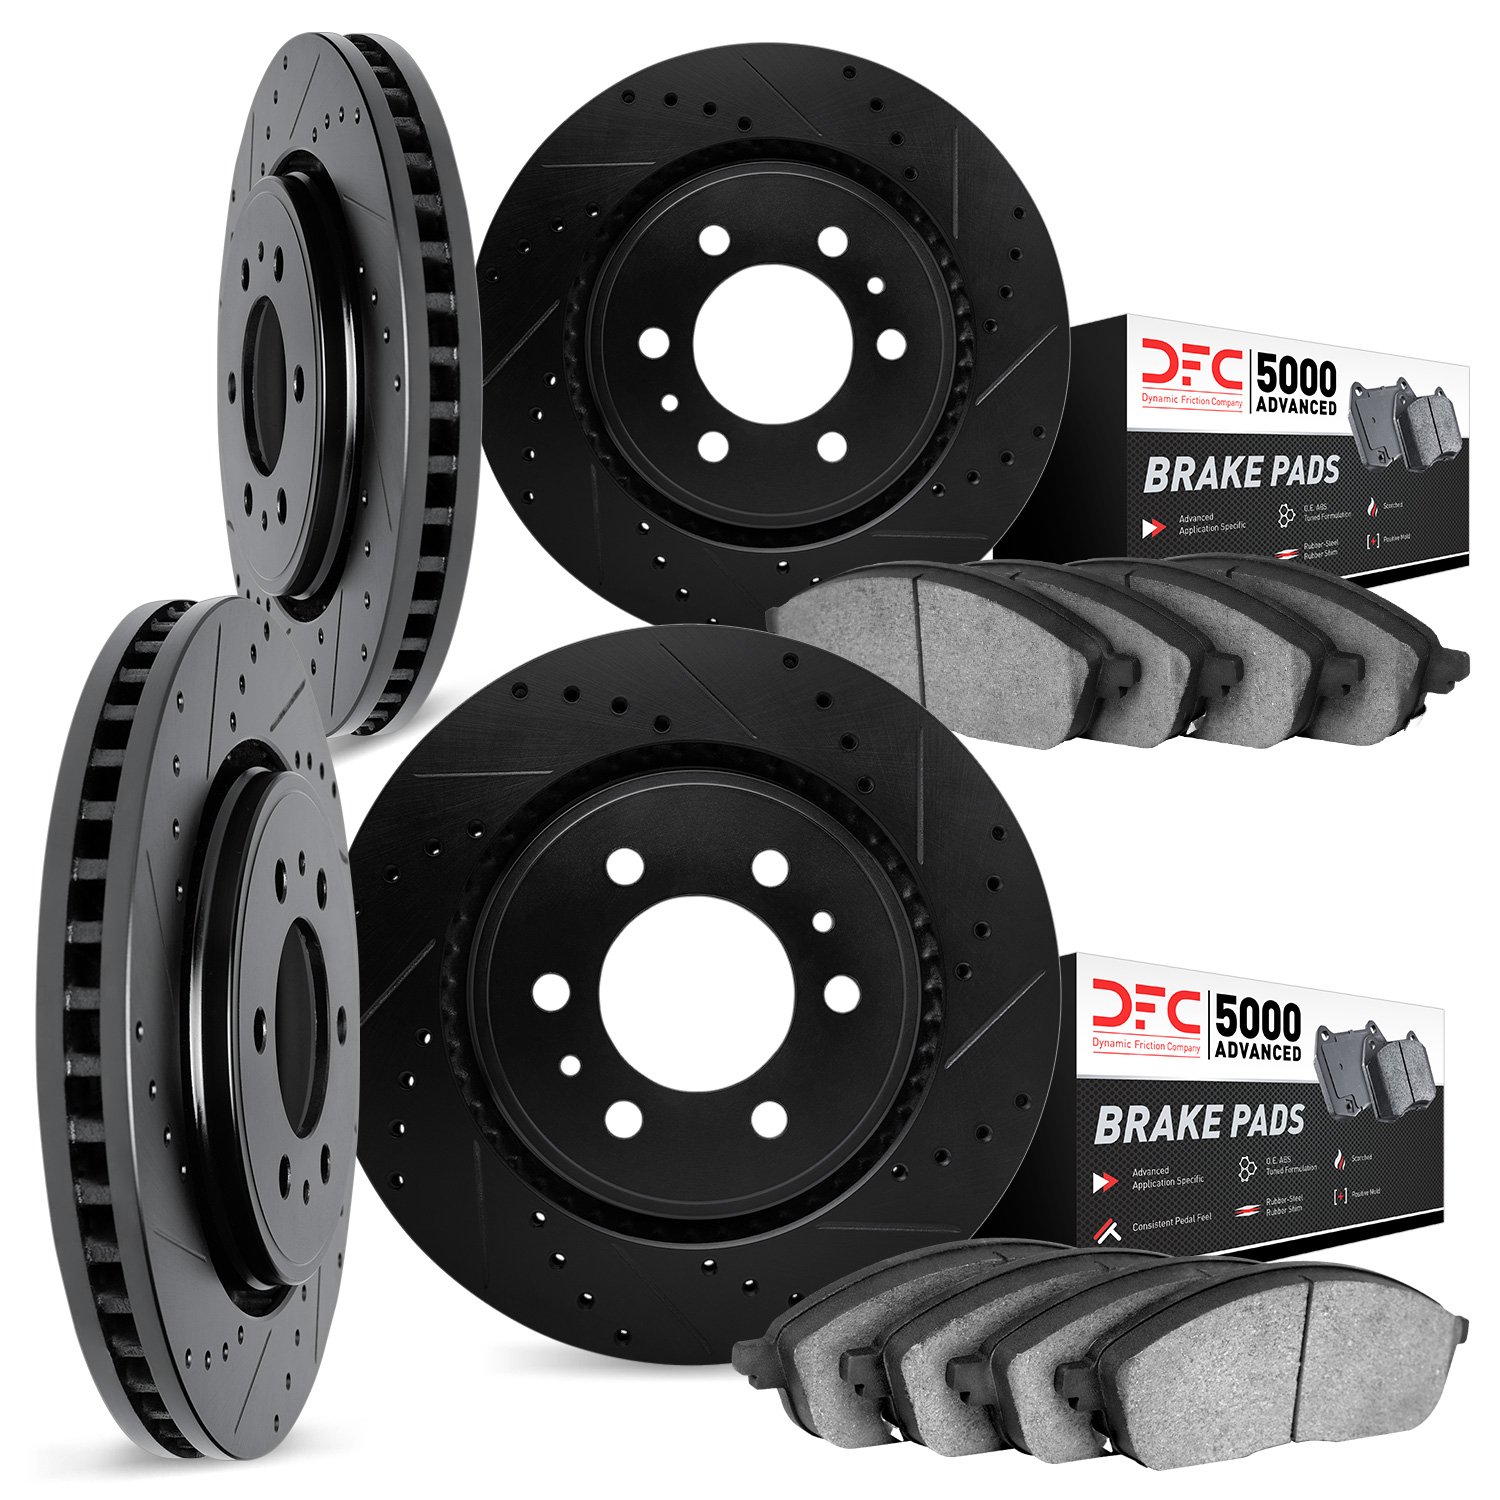 8504-48036 Drilled/Slotted Brake Rotors w/5000 Advanced Brake Pads Kit [Black], 2002-2005 GM, Position: Front and Rear